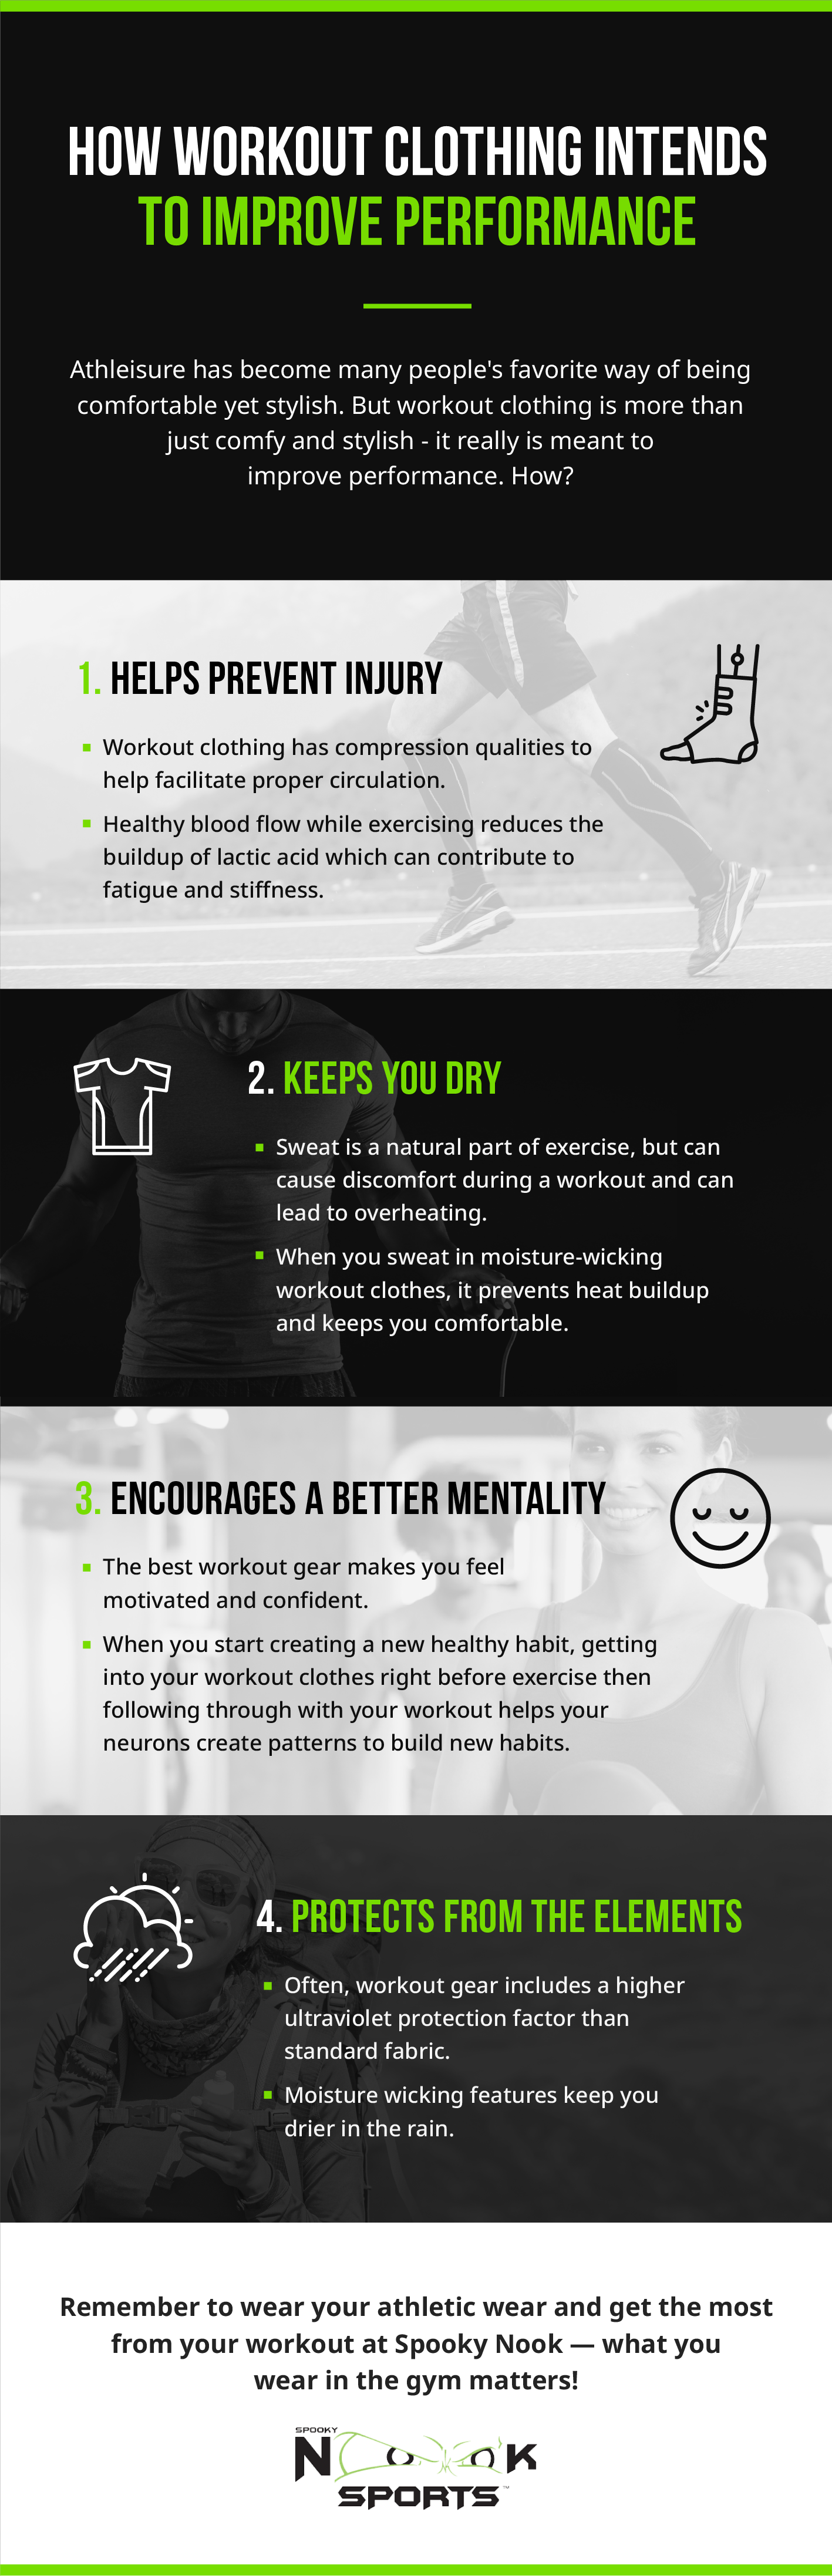 Infographic discussing how workout clothing improves performance